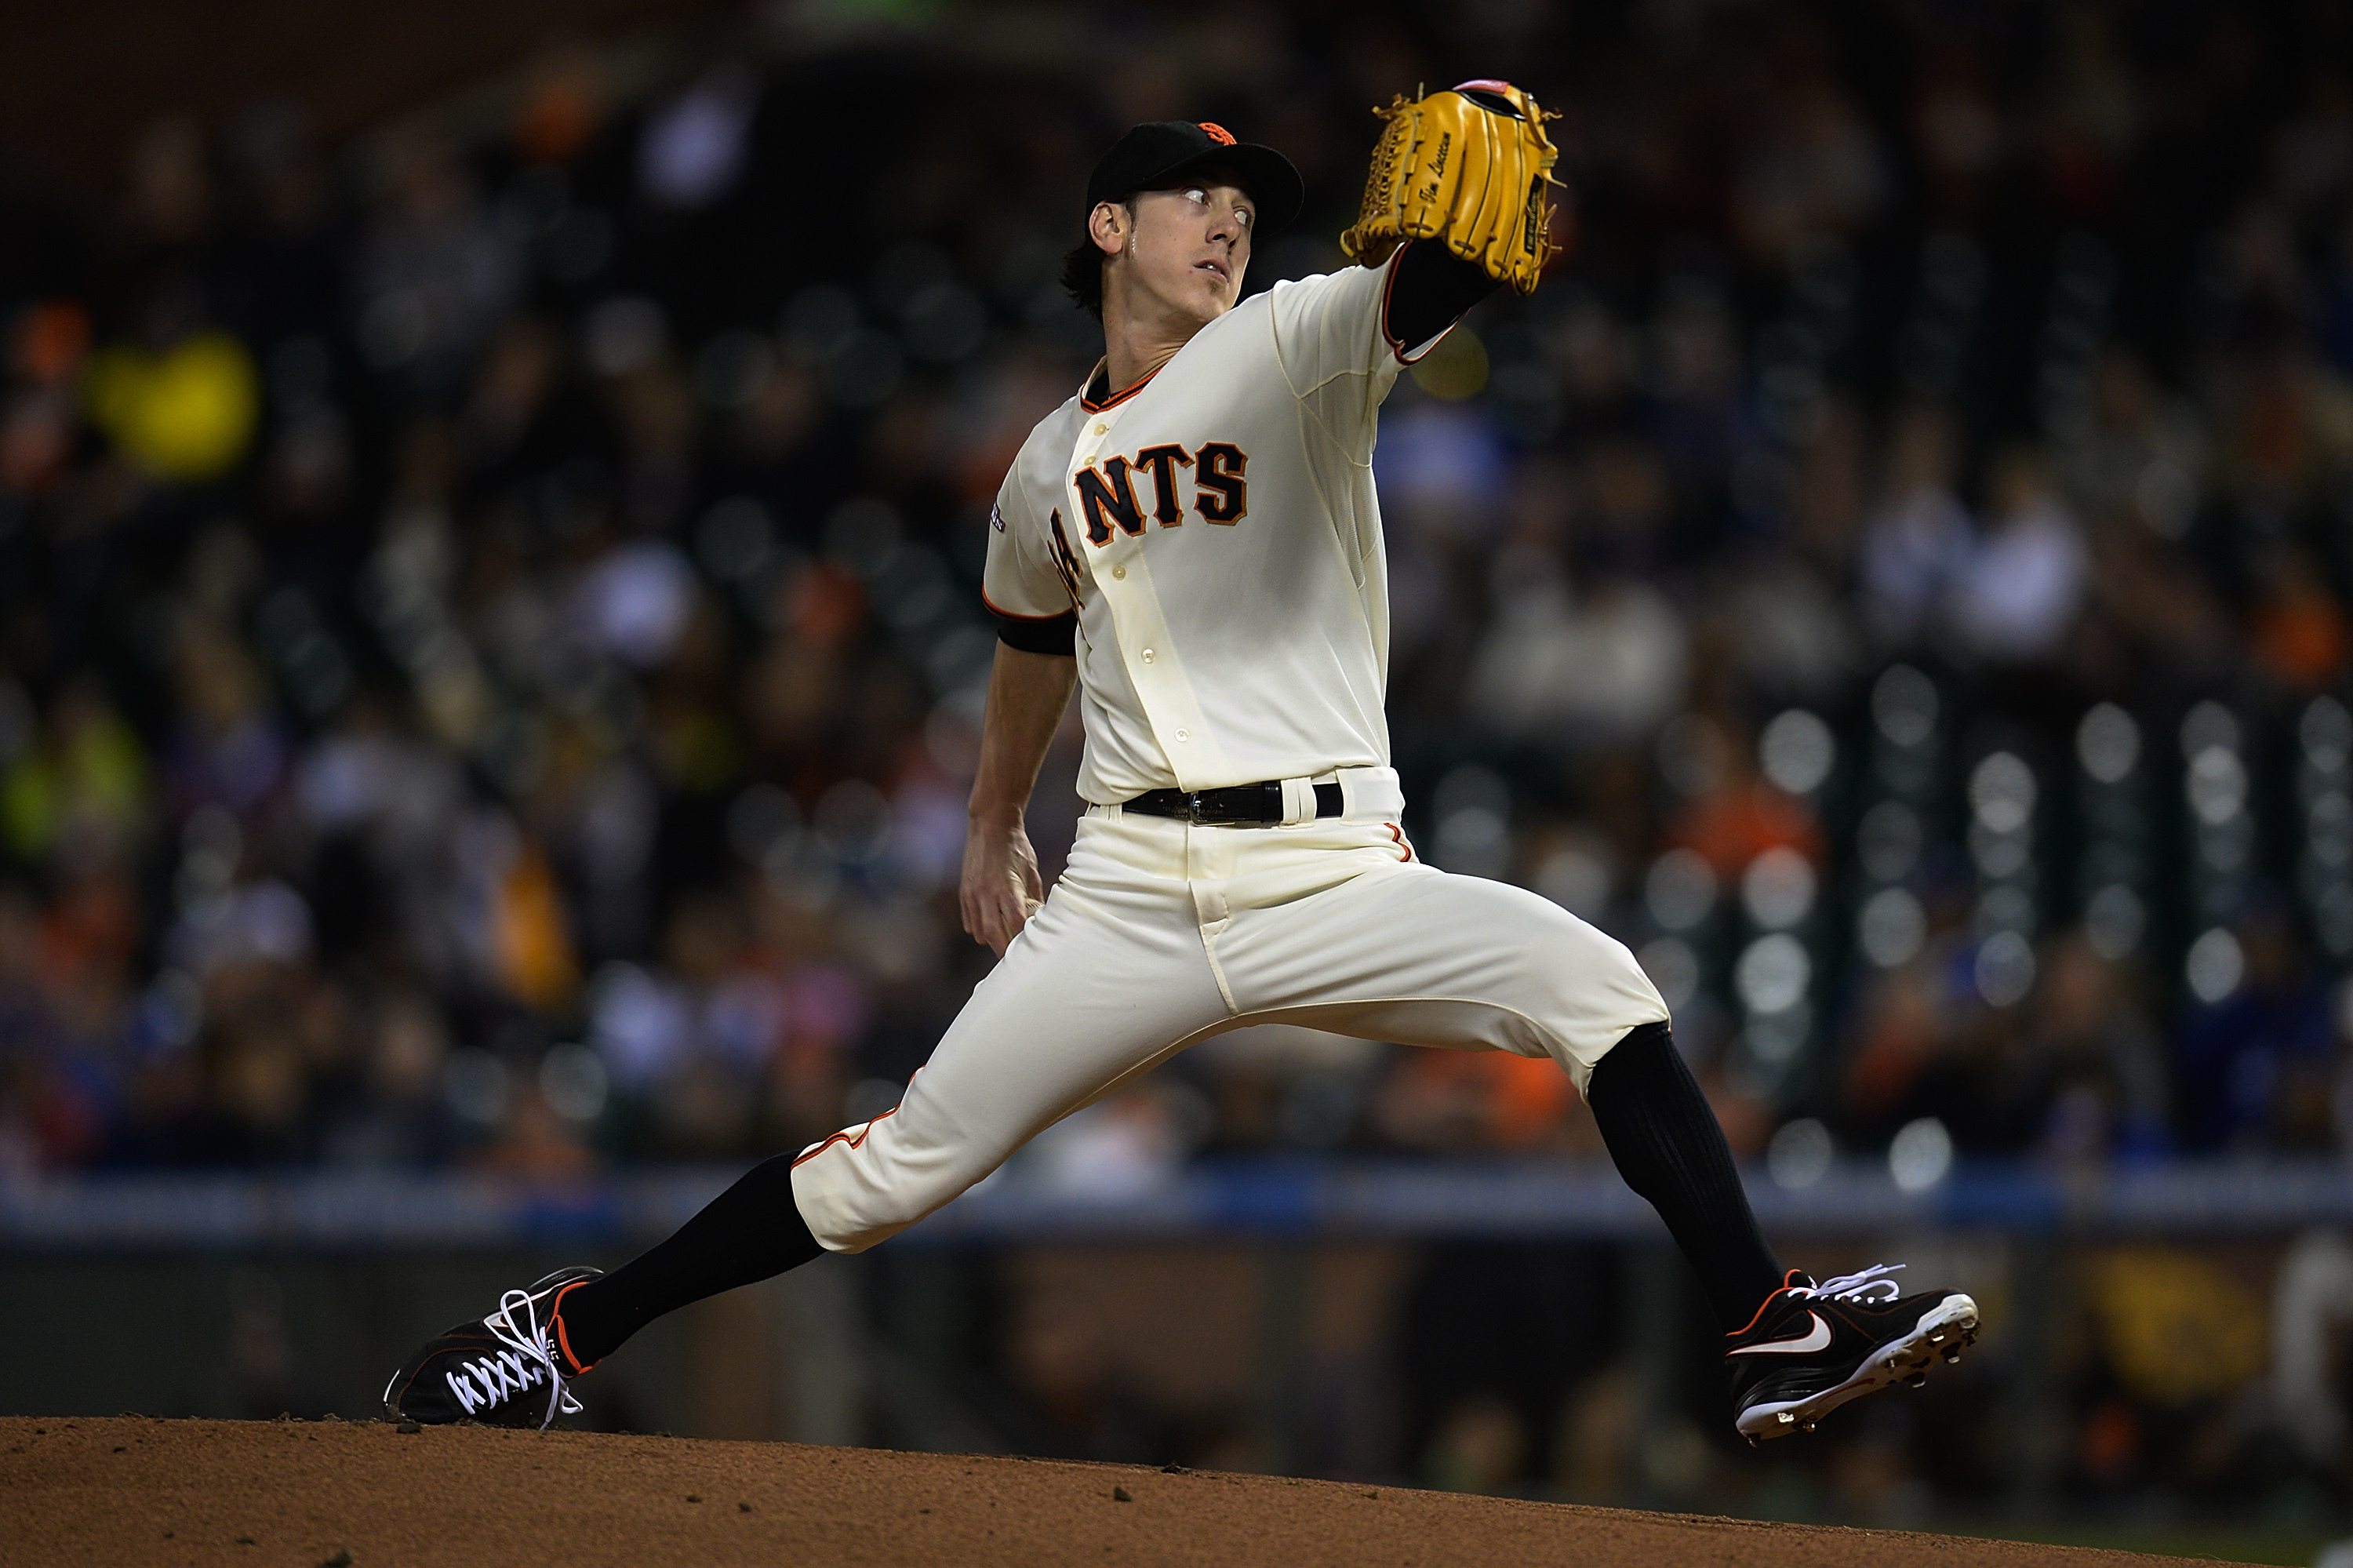 San Francisco Giants interested in reunion with Tim Lincecum - ESPN